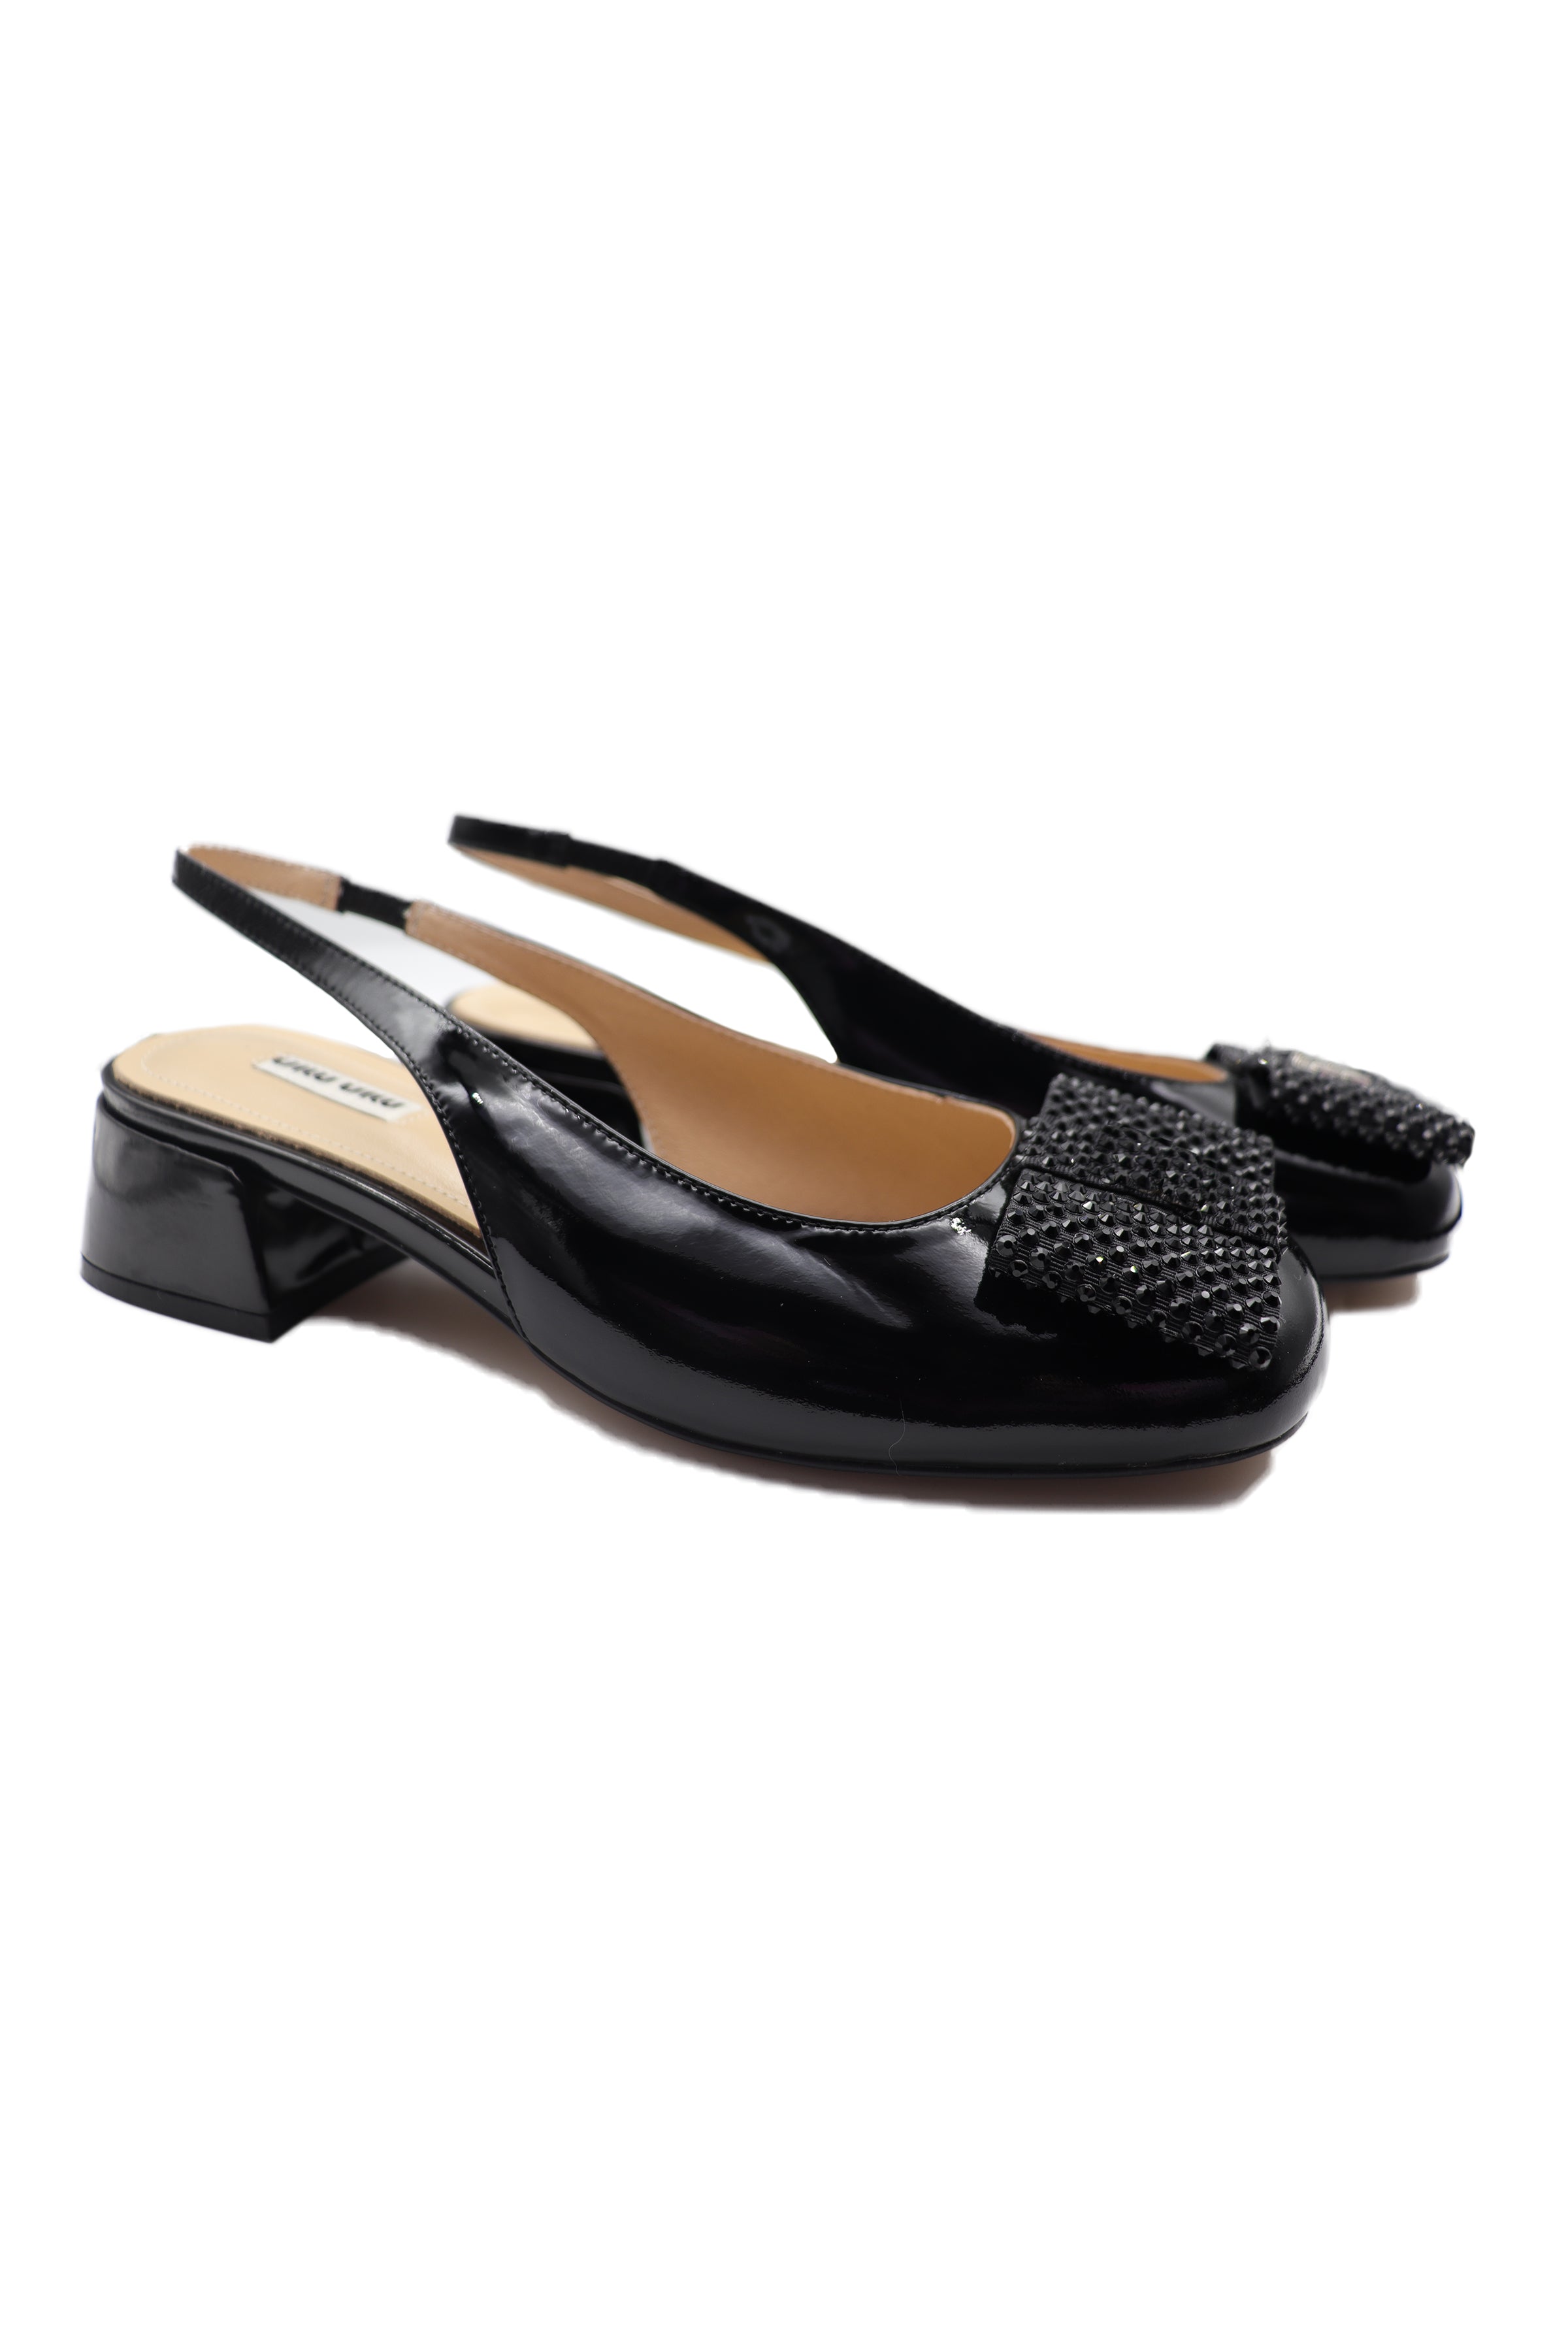 Black genuine patent leather Square Toe Mary Jane Shoes